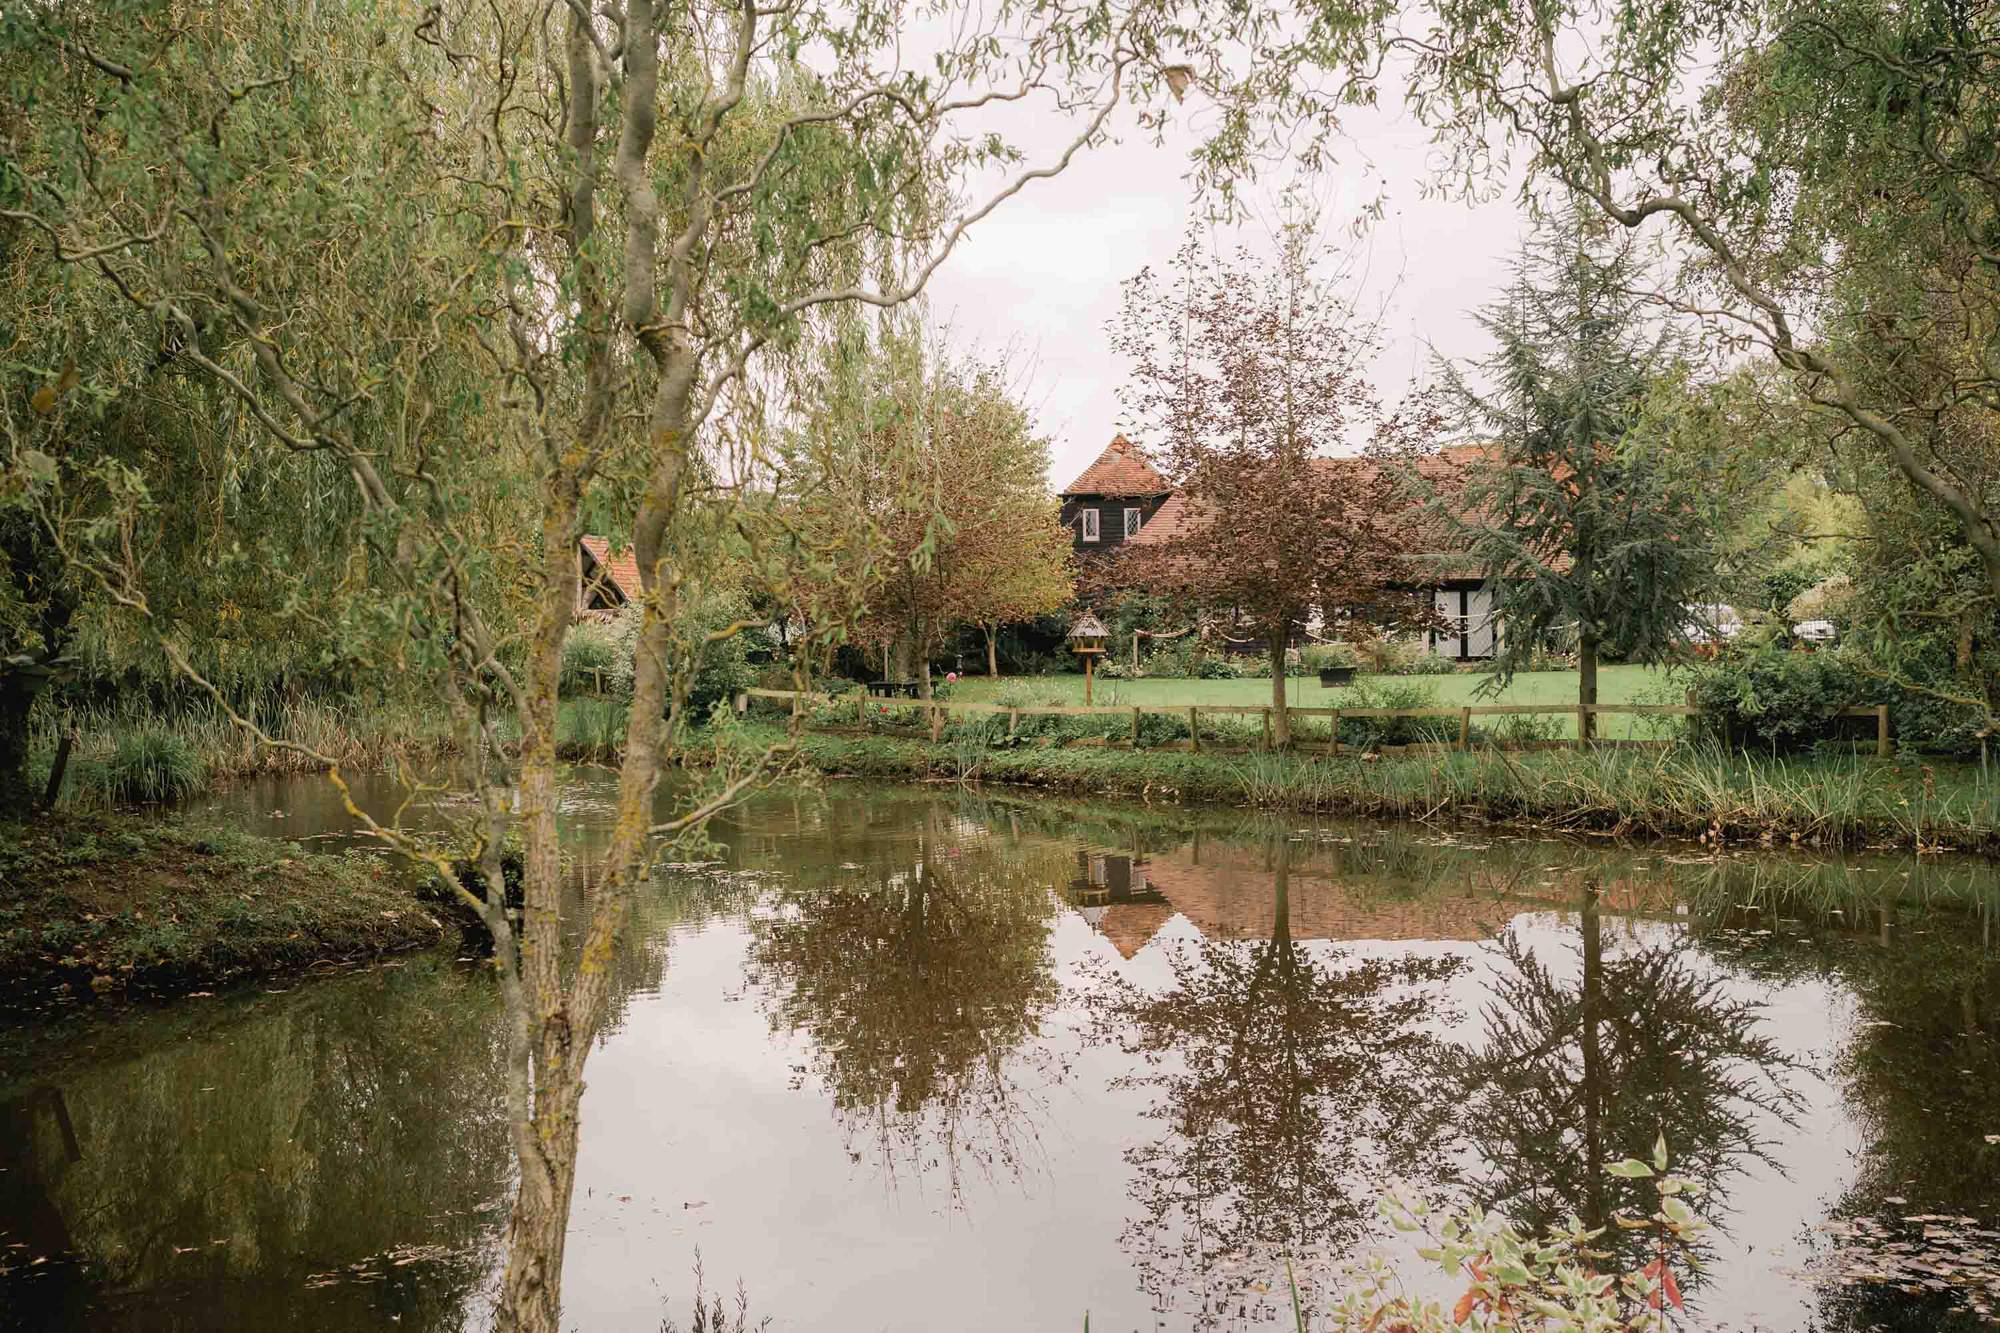 Pond and gardens at Rumbolds Farms wedding venue in Billingshurst, Sussex.